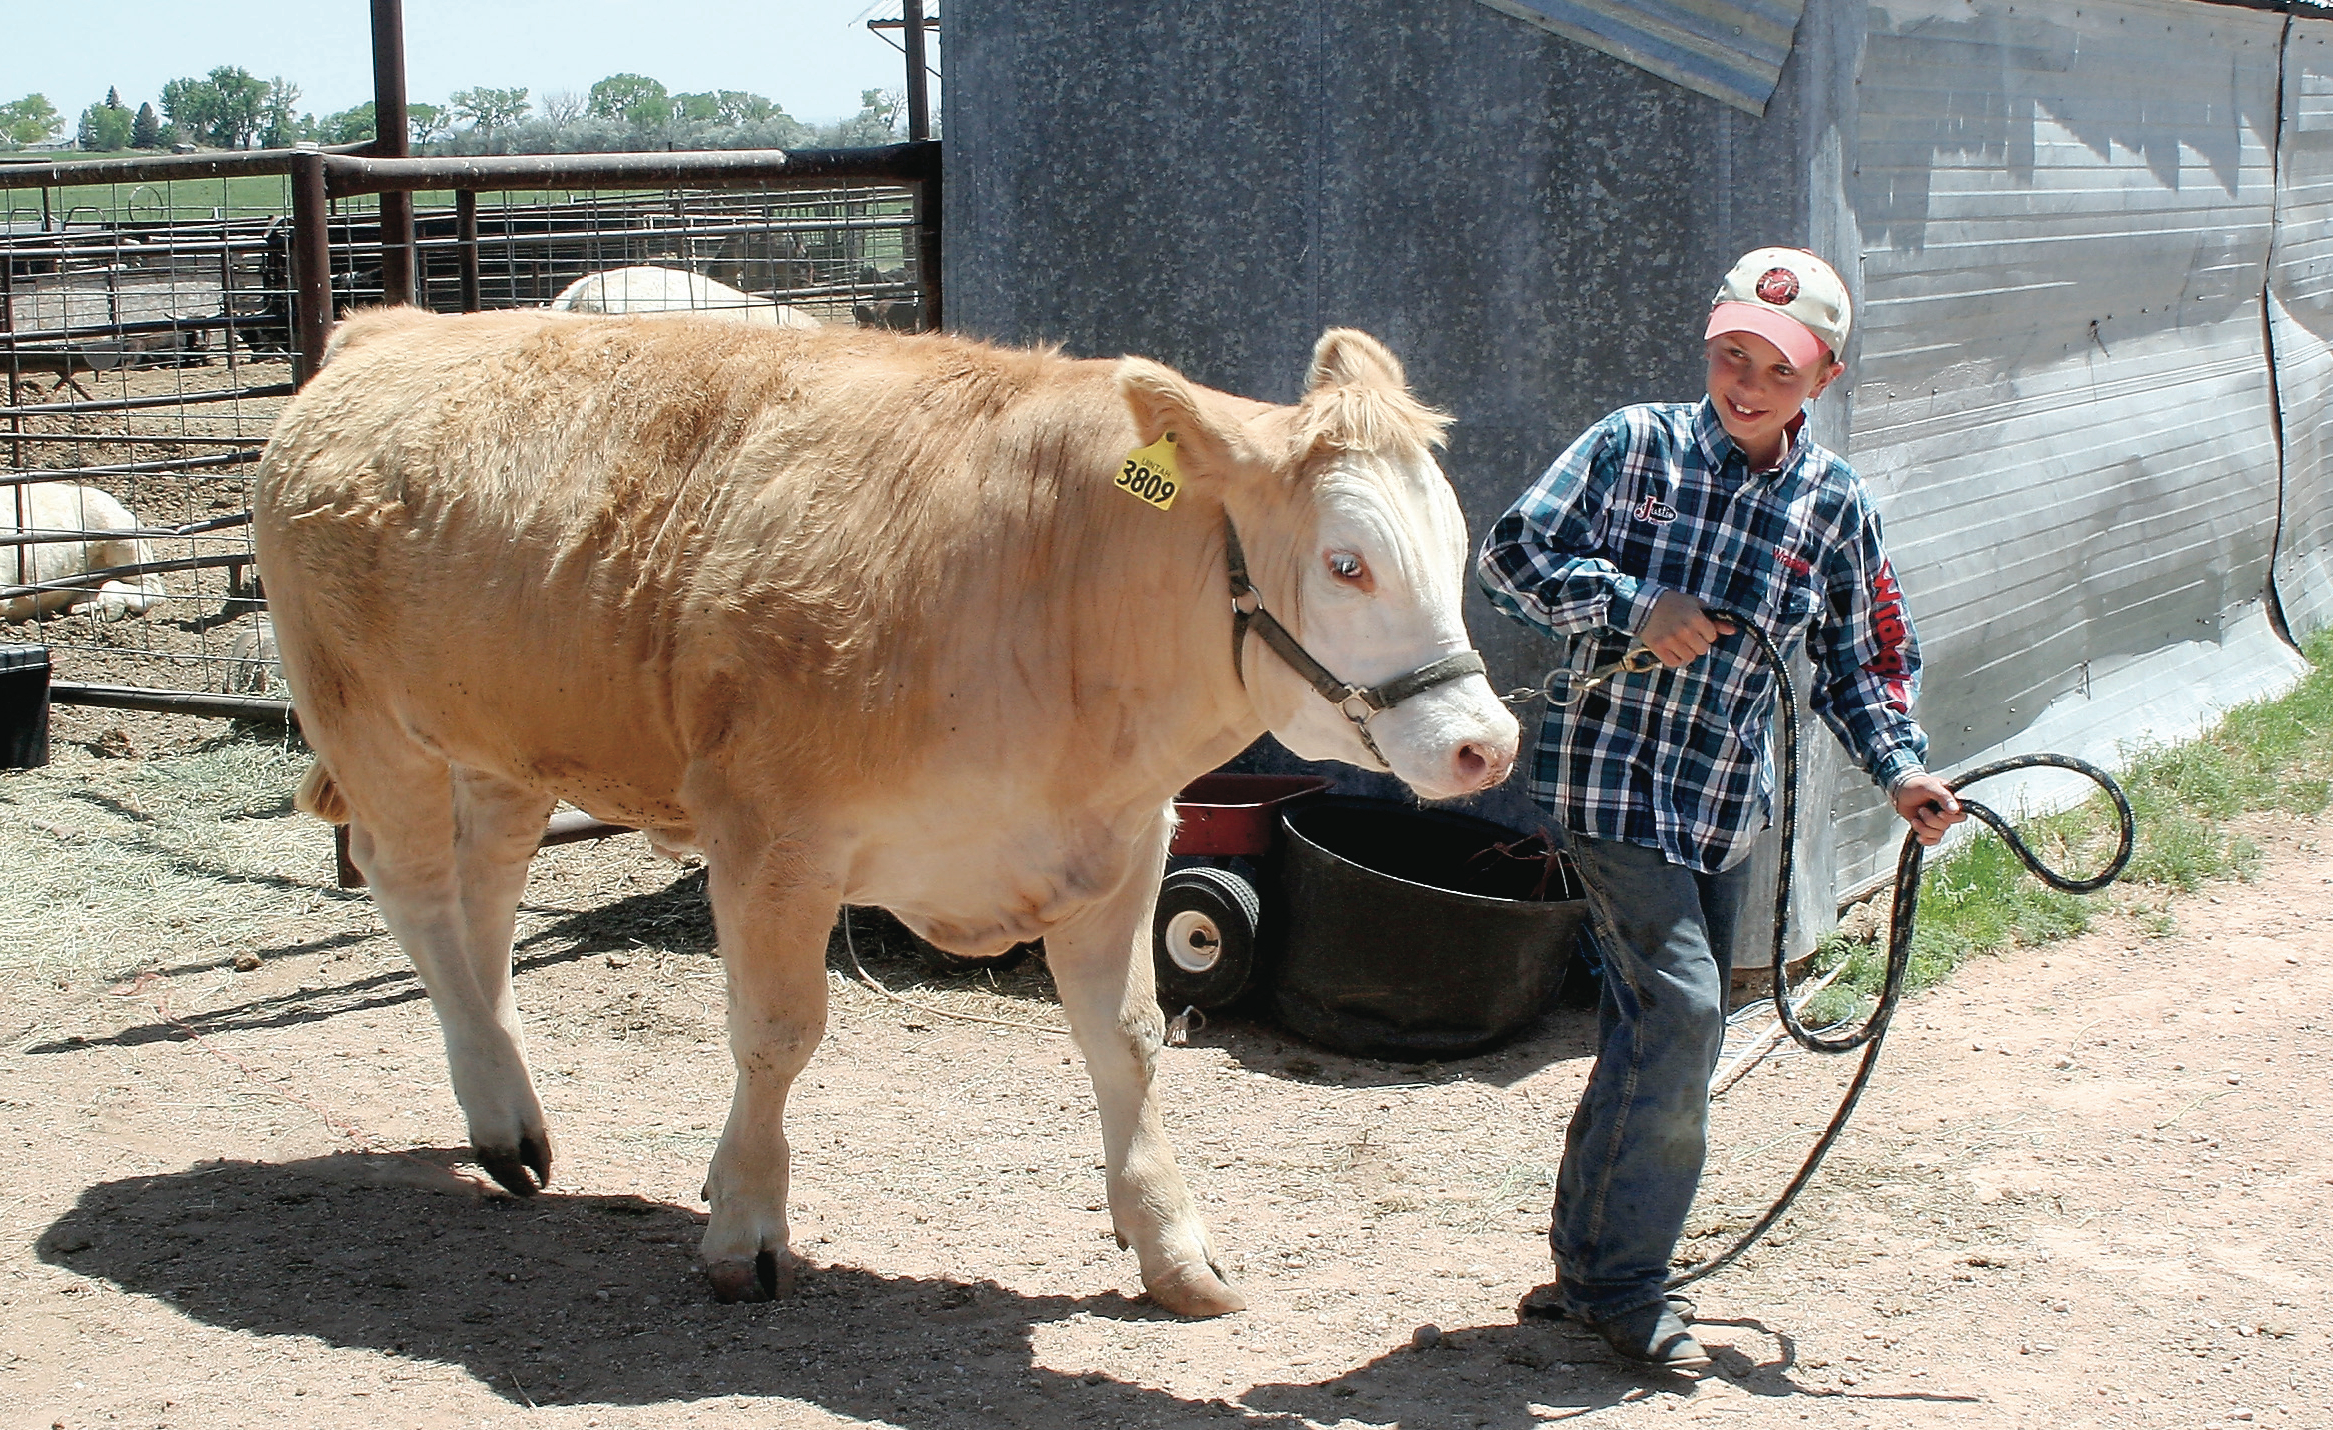 Josh Frost leads his 1,100-pound steer, Goober, from its corral. Josh, age 12, has been showing animals at livestock shows since he was in third grade.